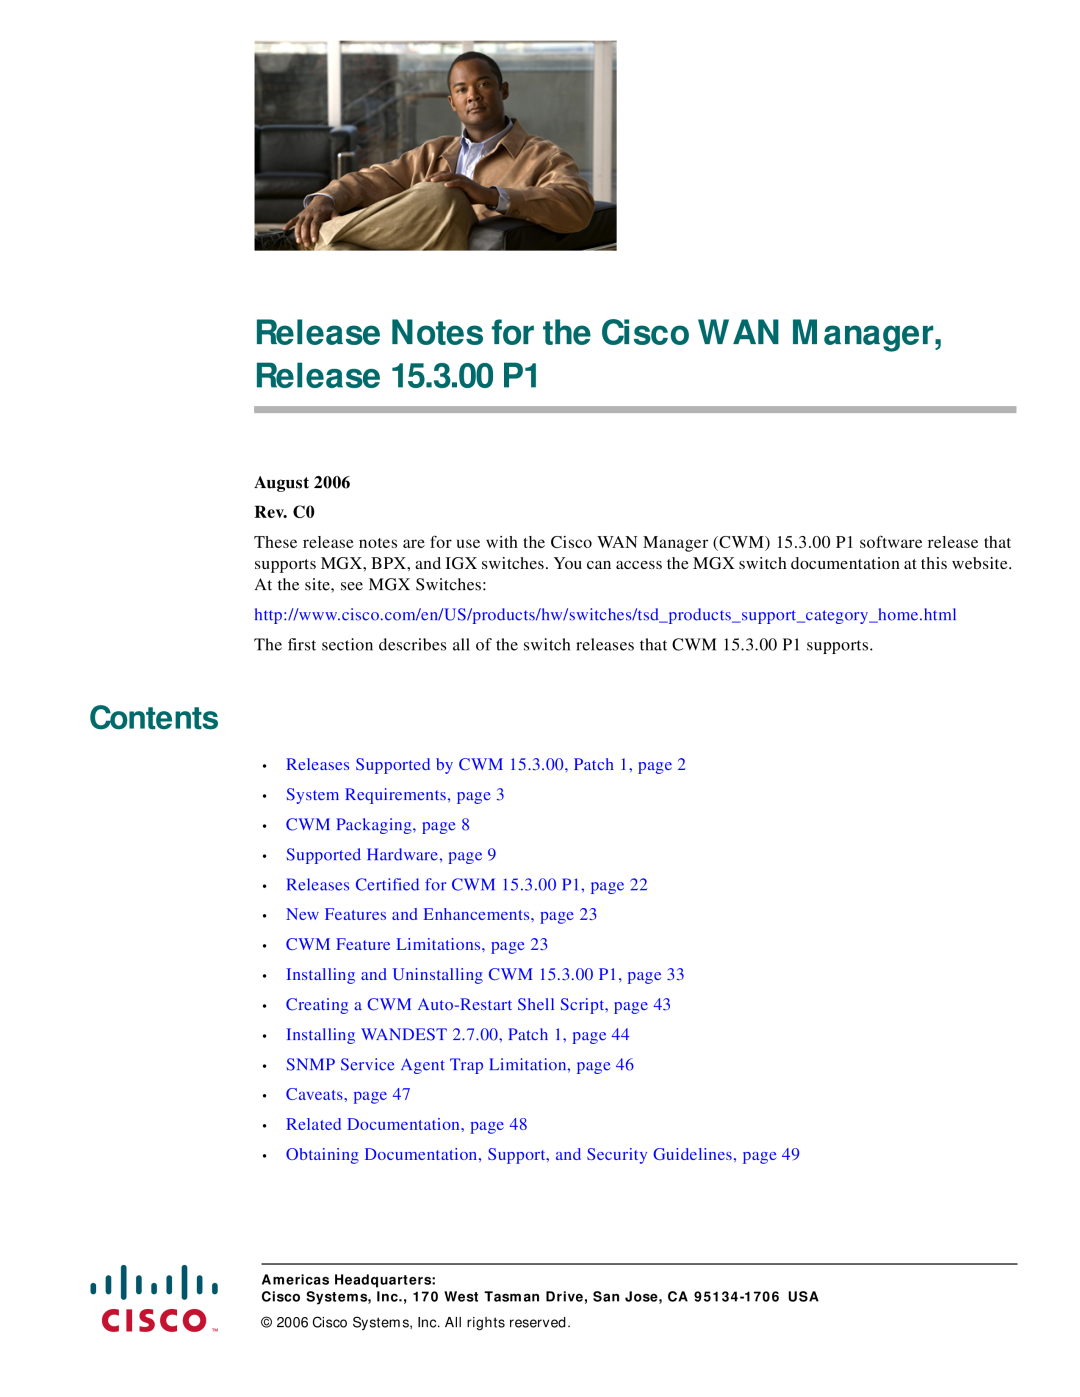 Cisco Systems 15.3.00P1 manual Contents, Releases Supported by CWM 15.3.00, Patch 1, page, Related Documentation, page 